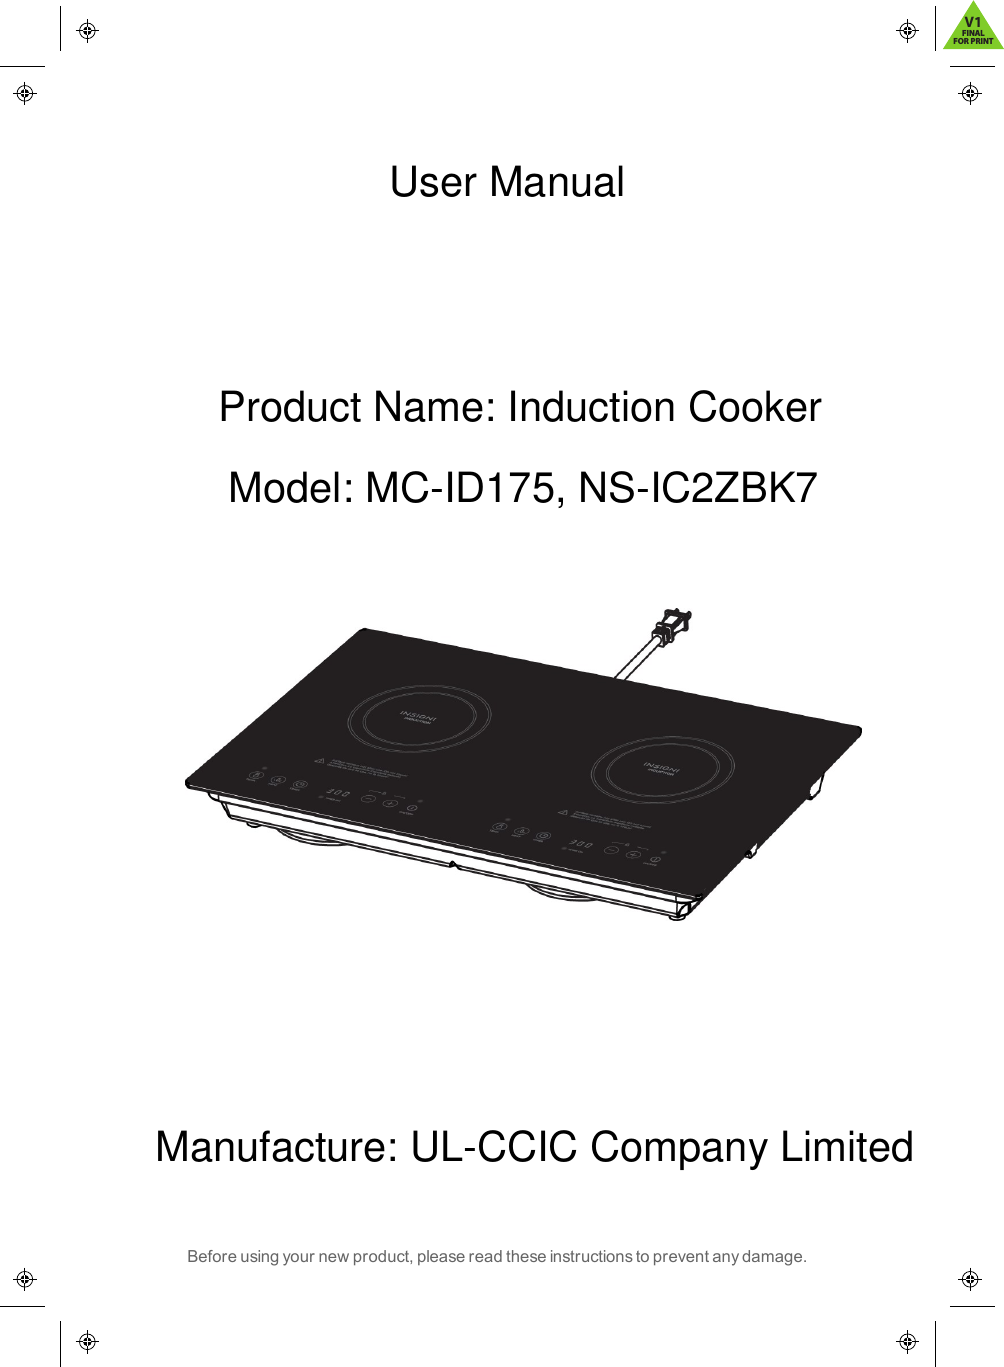 Before using your new product, please read these instructions to prevent any damage.User ManualProduct Name: Induction CookerModel: MC-ID175, NS-IC2ZBK7Manufacture: UL-CCIC Company LimitedV1FINALFOR PRINT